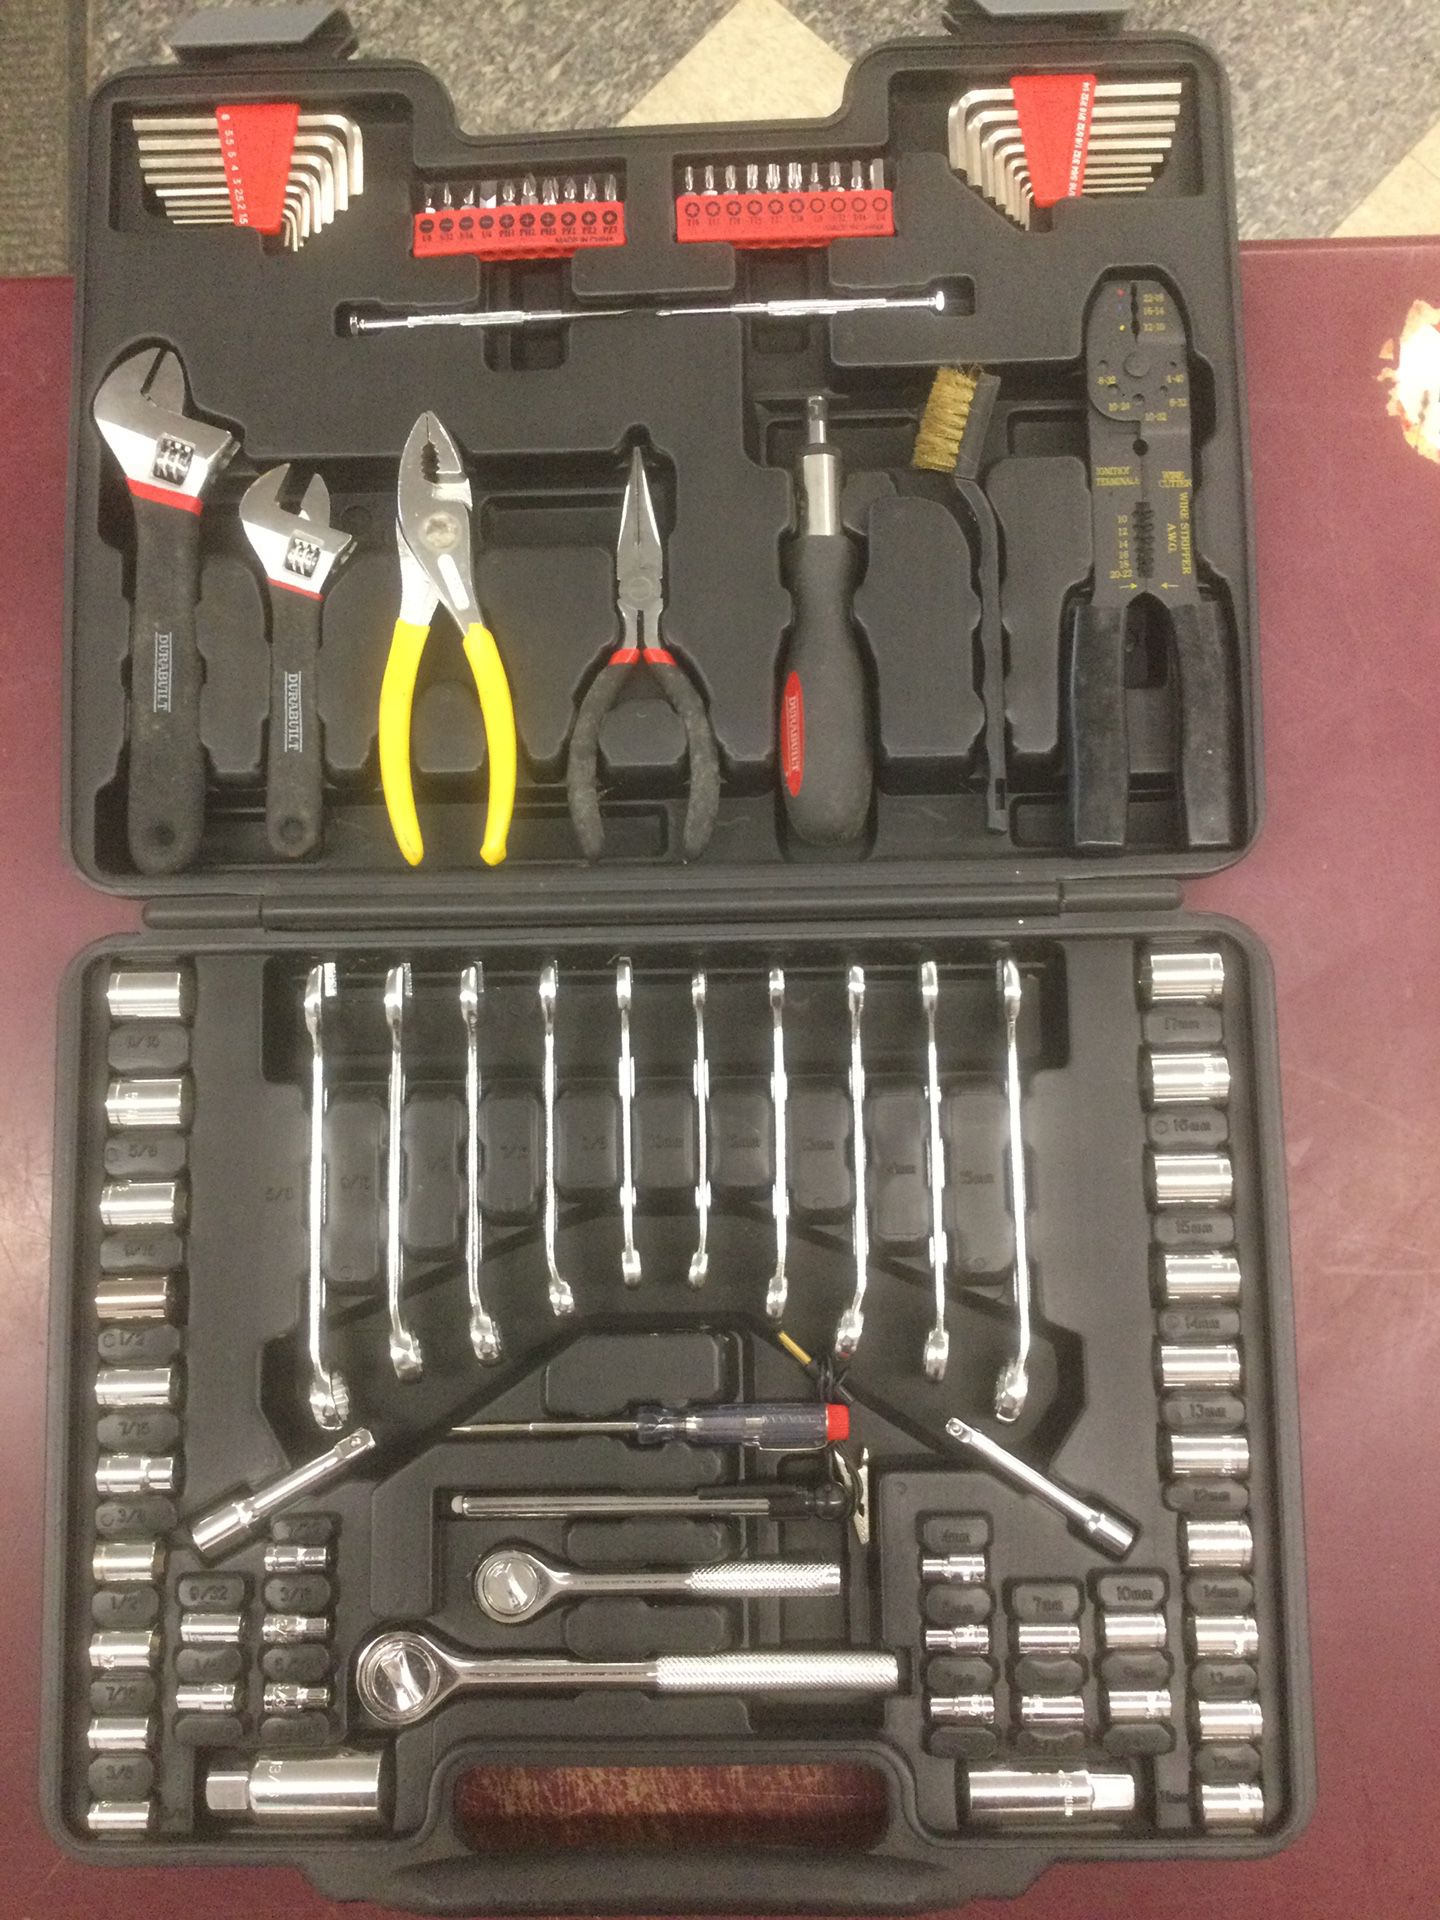 MECHANICS TOOL SOCKET WRENCH SET METRIC / MM AND STANDARD / SAE : Sockets Wrenches Pliers 1/4” 3/8” Drive